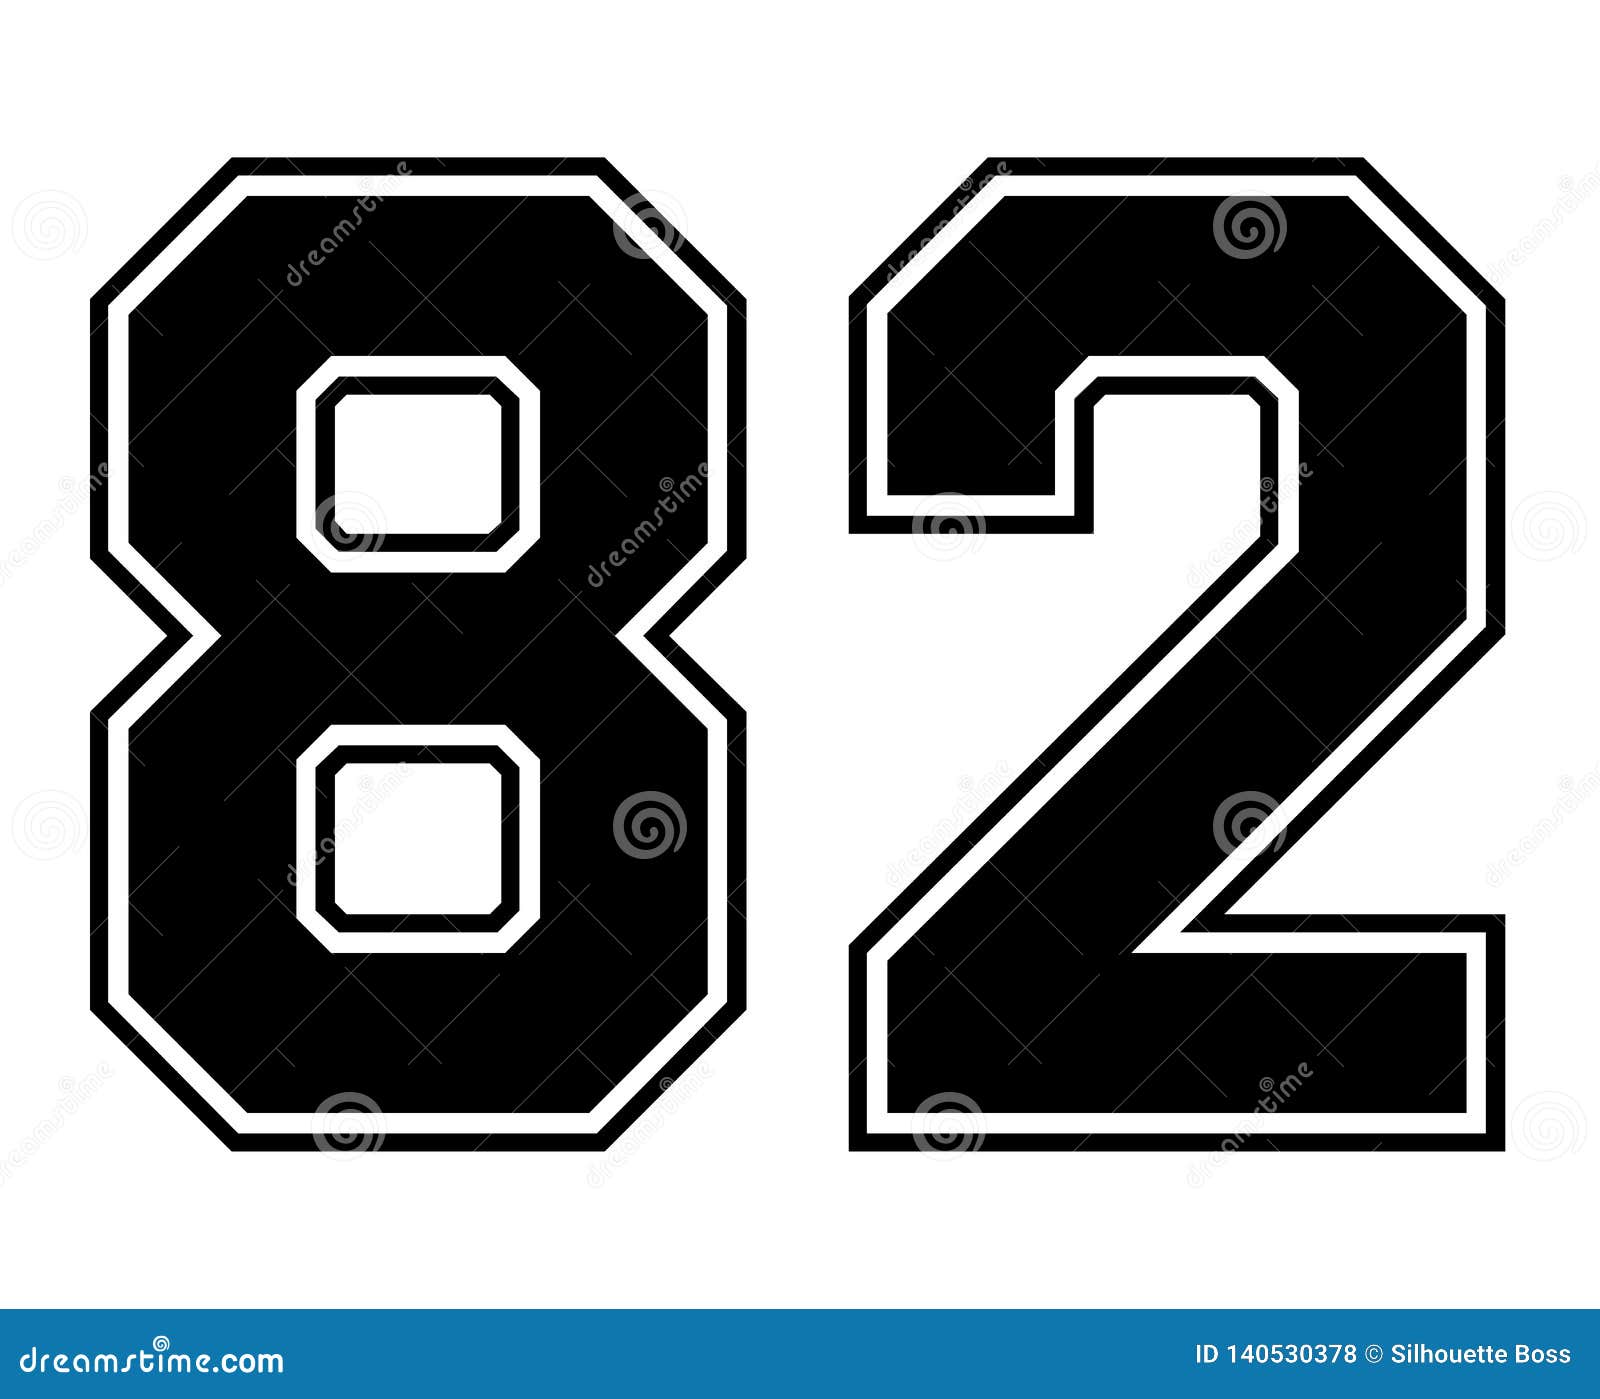 football jersey numbers